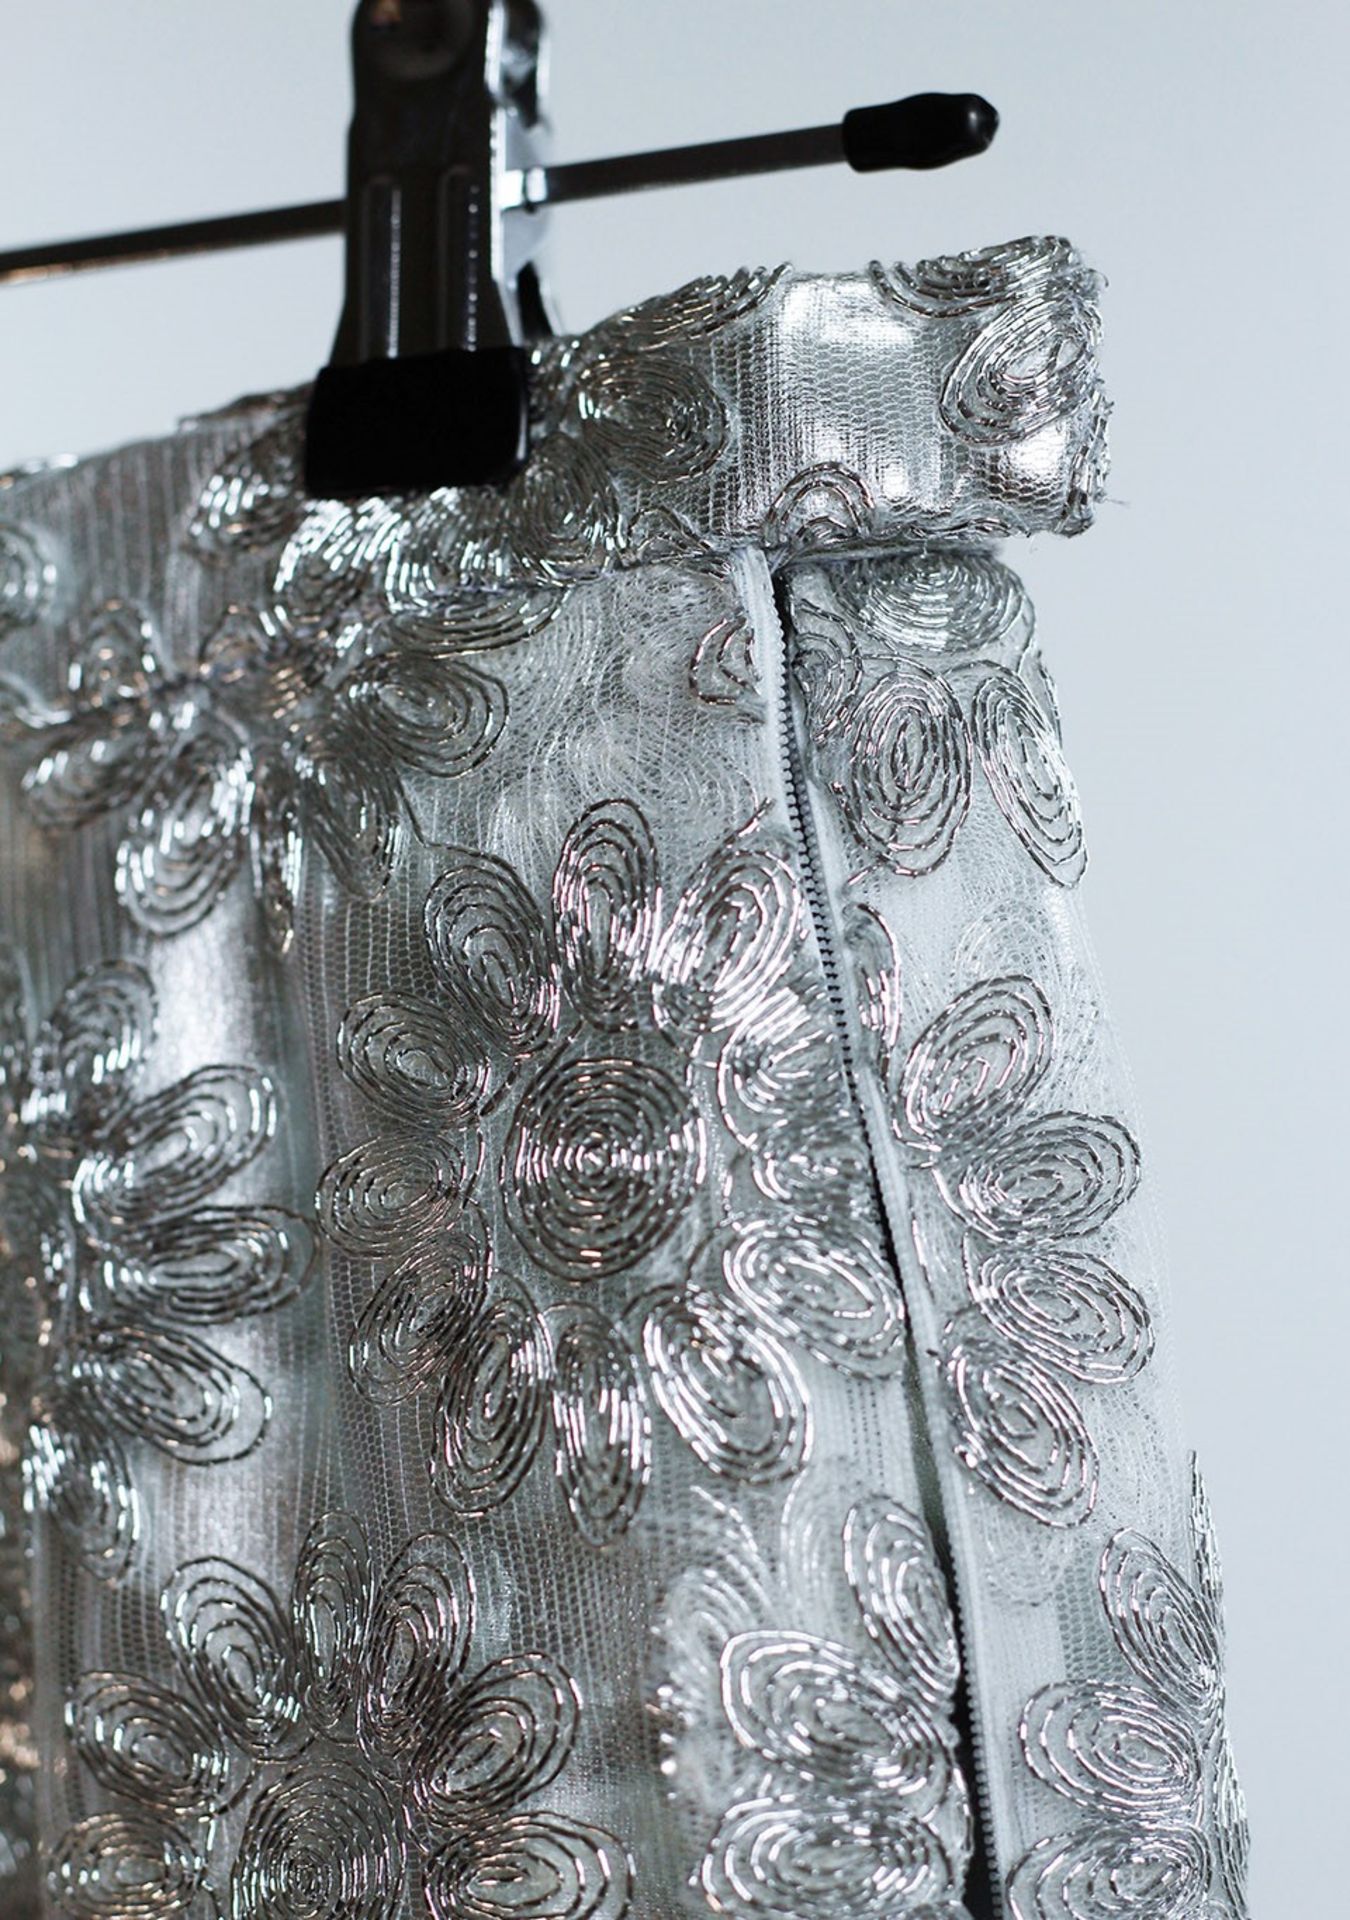 1 x Boutique Le Duc Silver Skirt - From a High End Clothing Boutique In The - Image 5 of 8